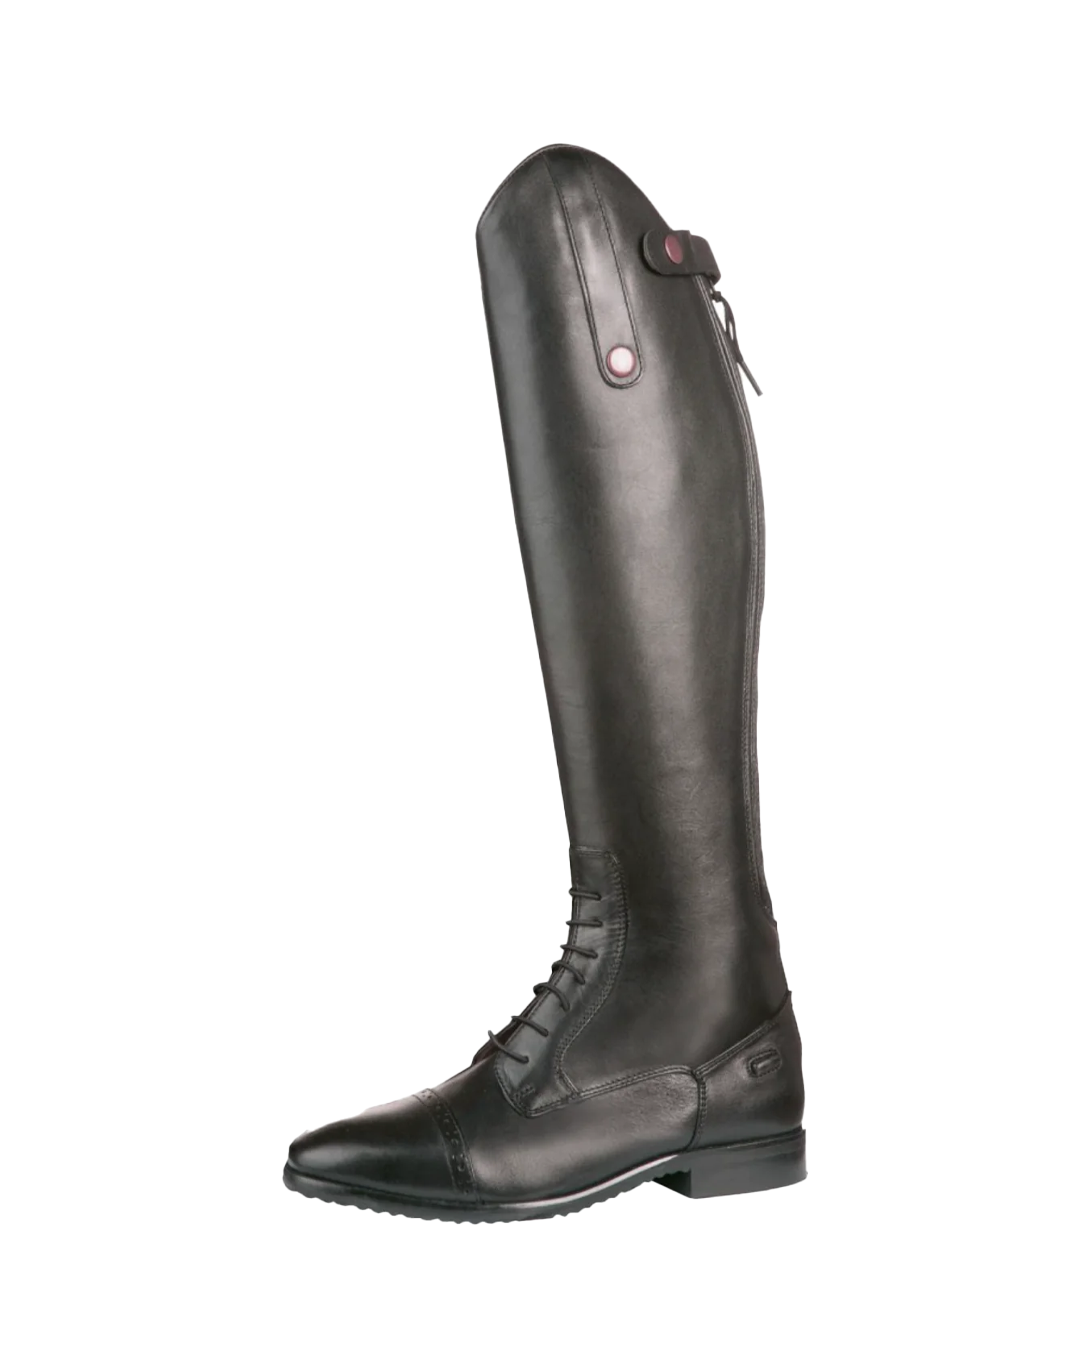 HKM Valencia Riding Boots (Standard Length/Width) Tall Boot HKM - Equestrian Fashion Outfitters